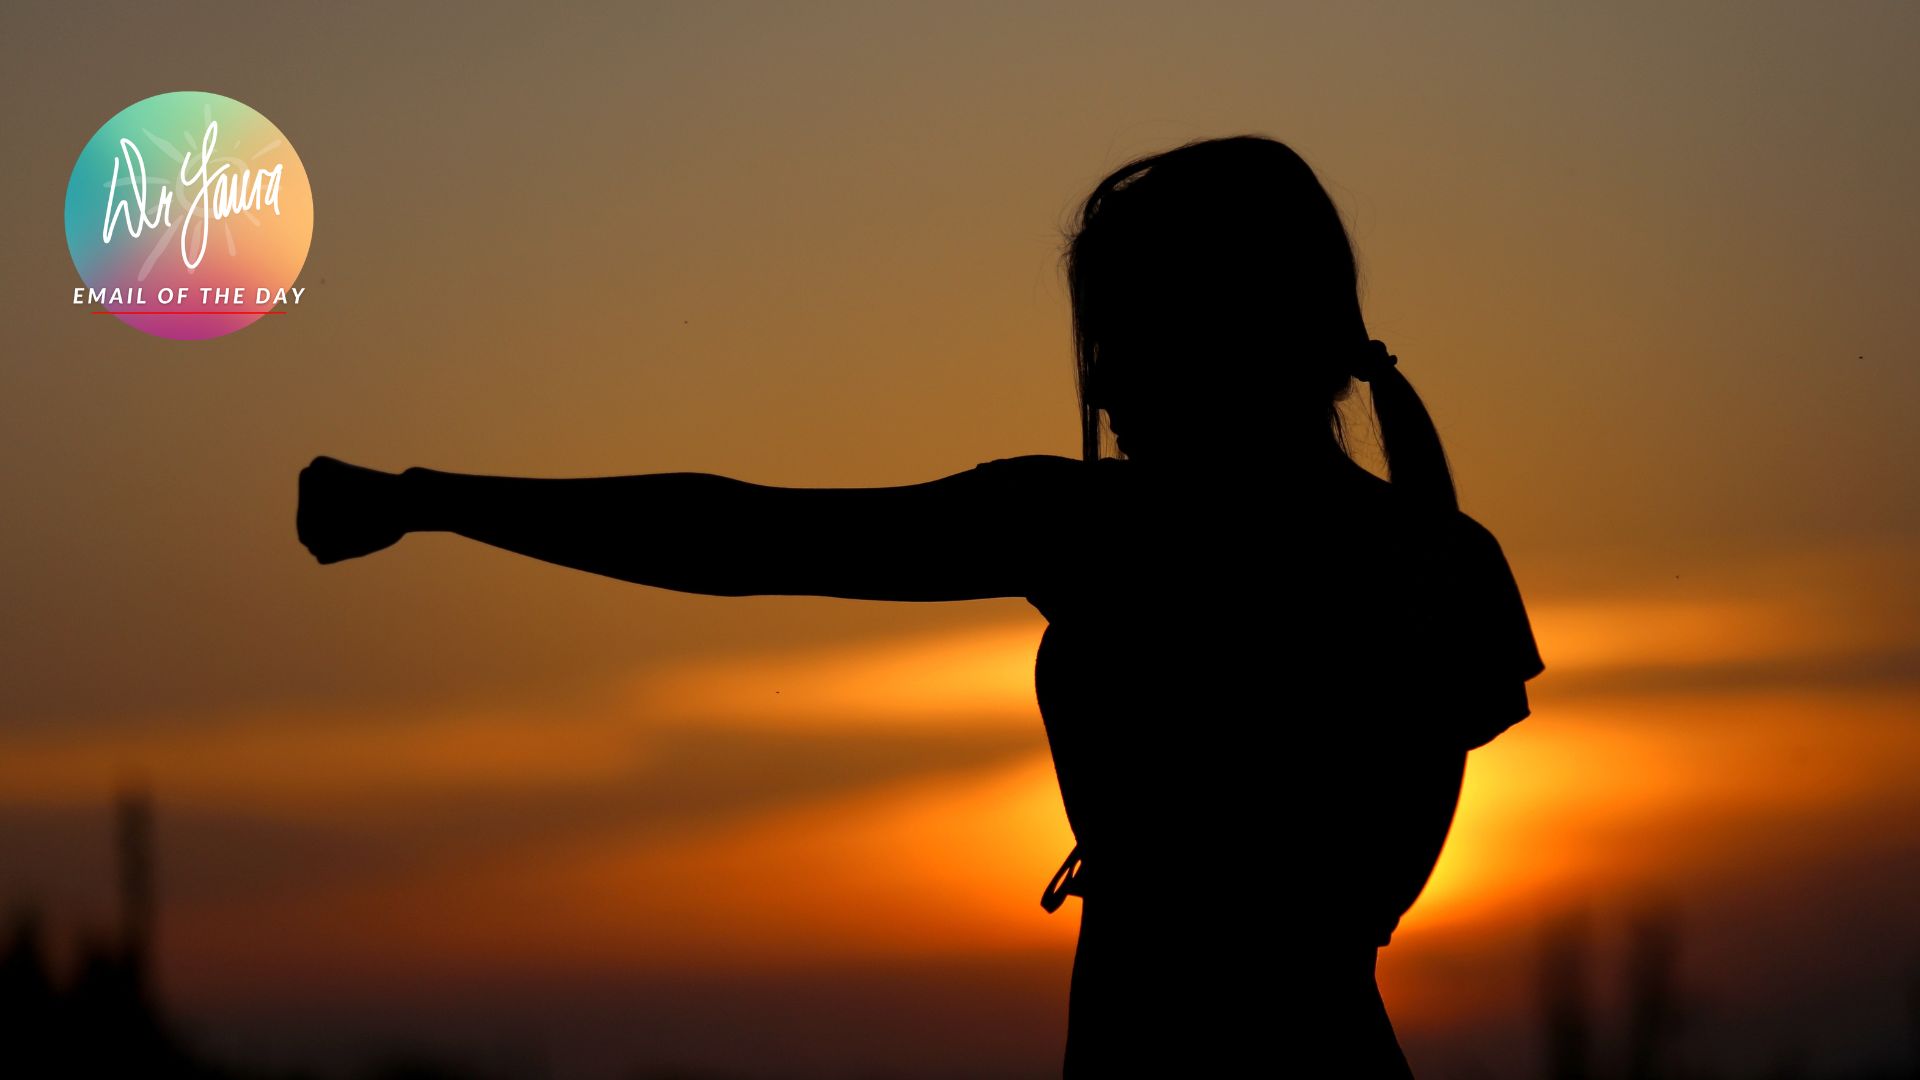 Silhouette of woman punching the air in the backdrop of a sunset